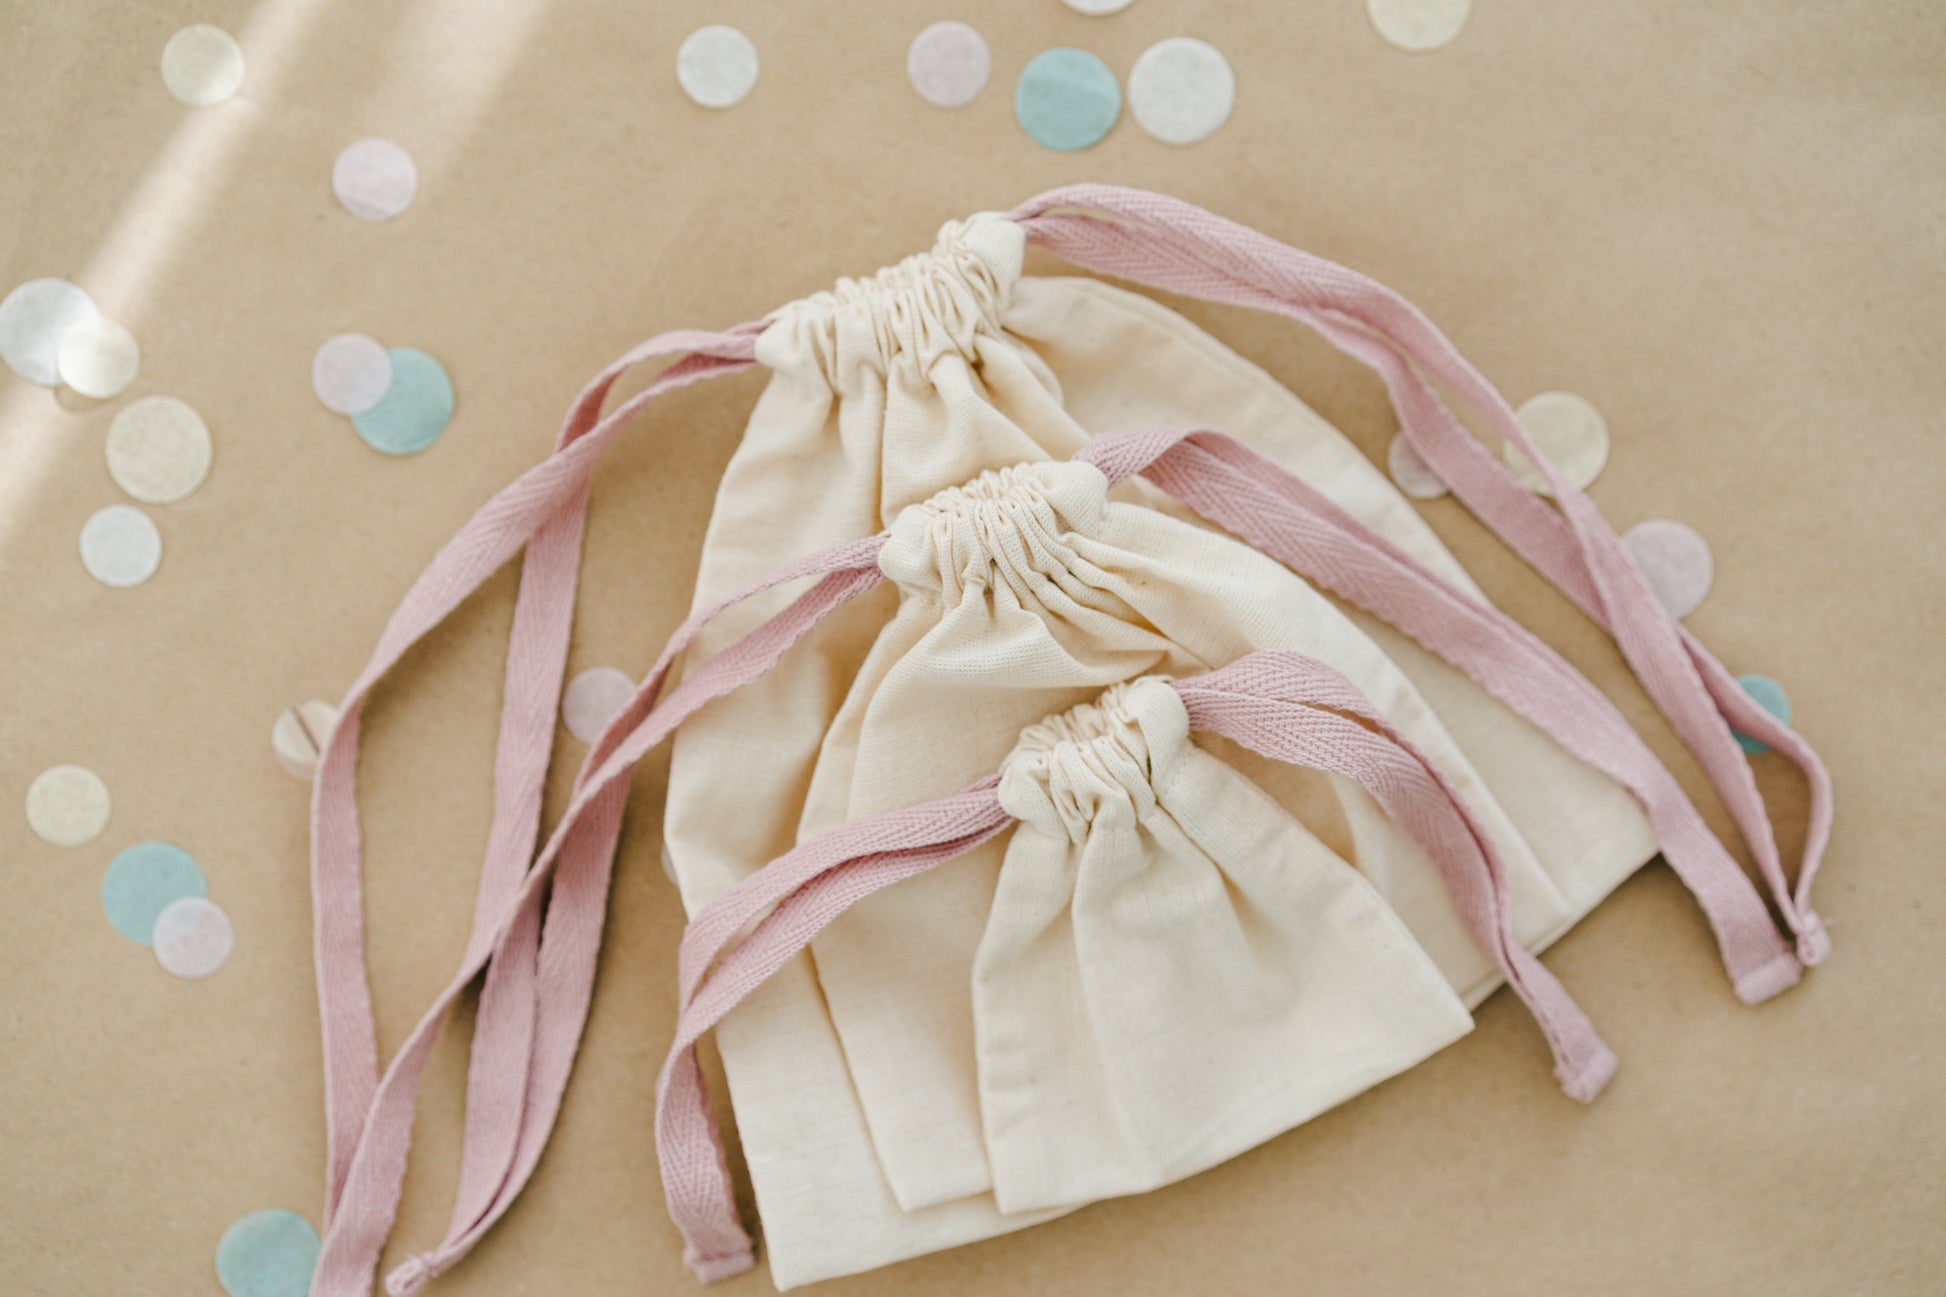 Baby's Clothing Bags with Pink Drawstrings